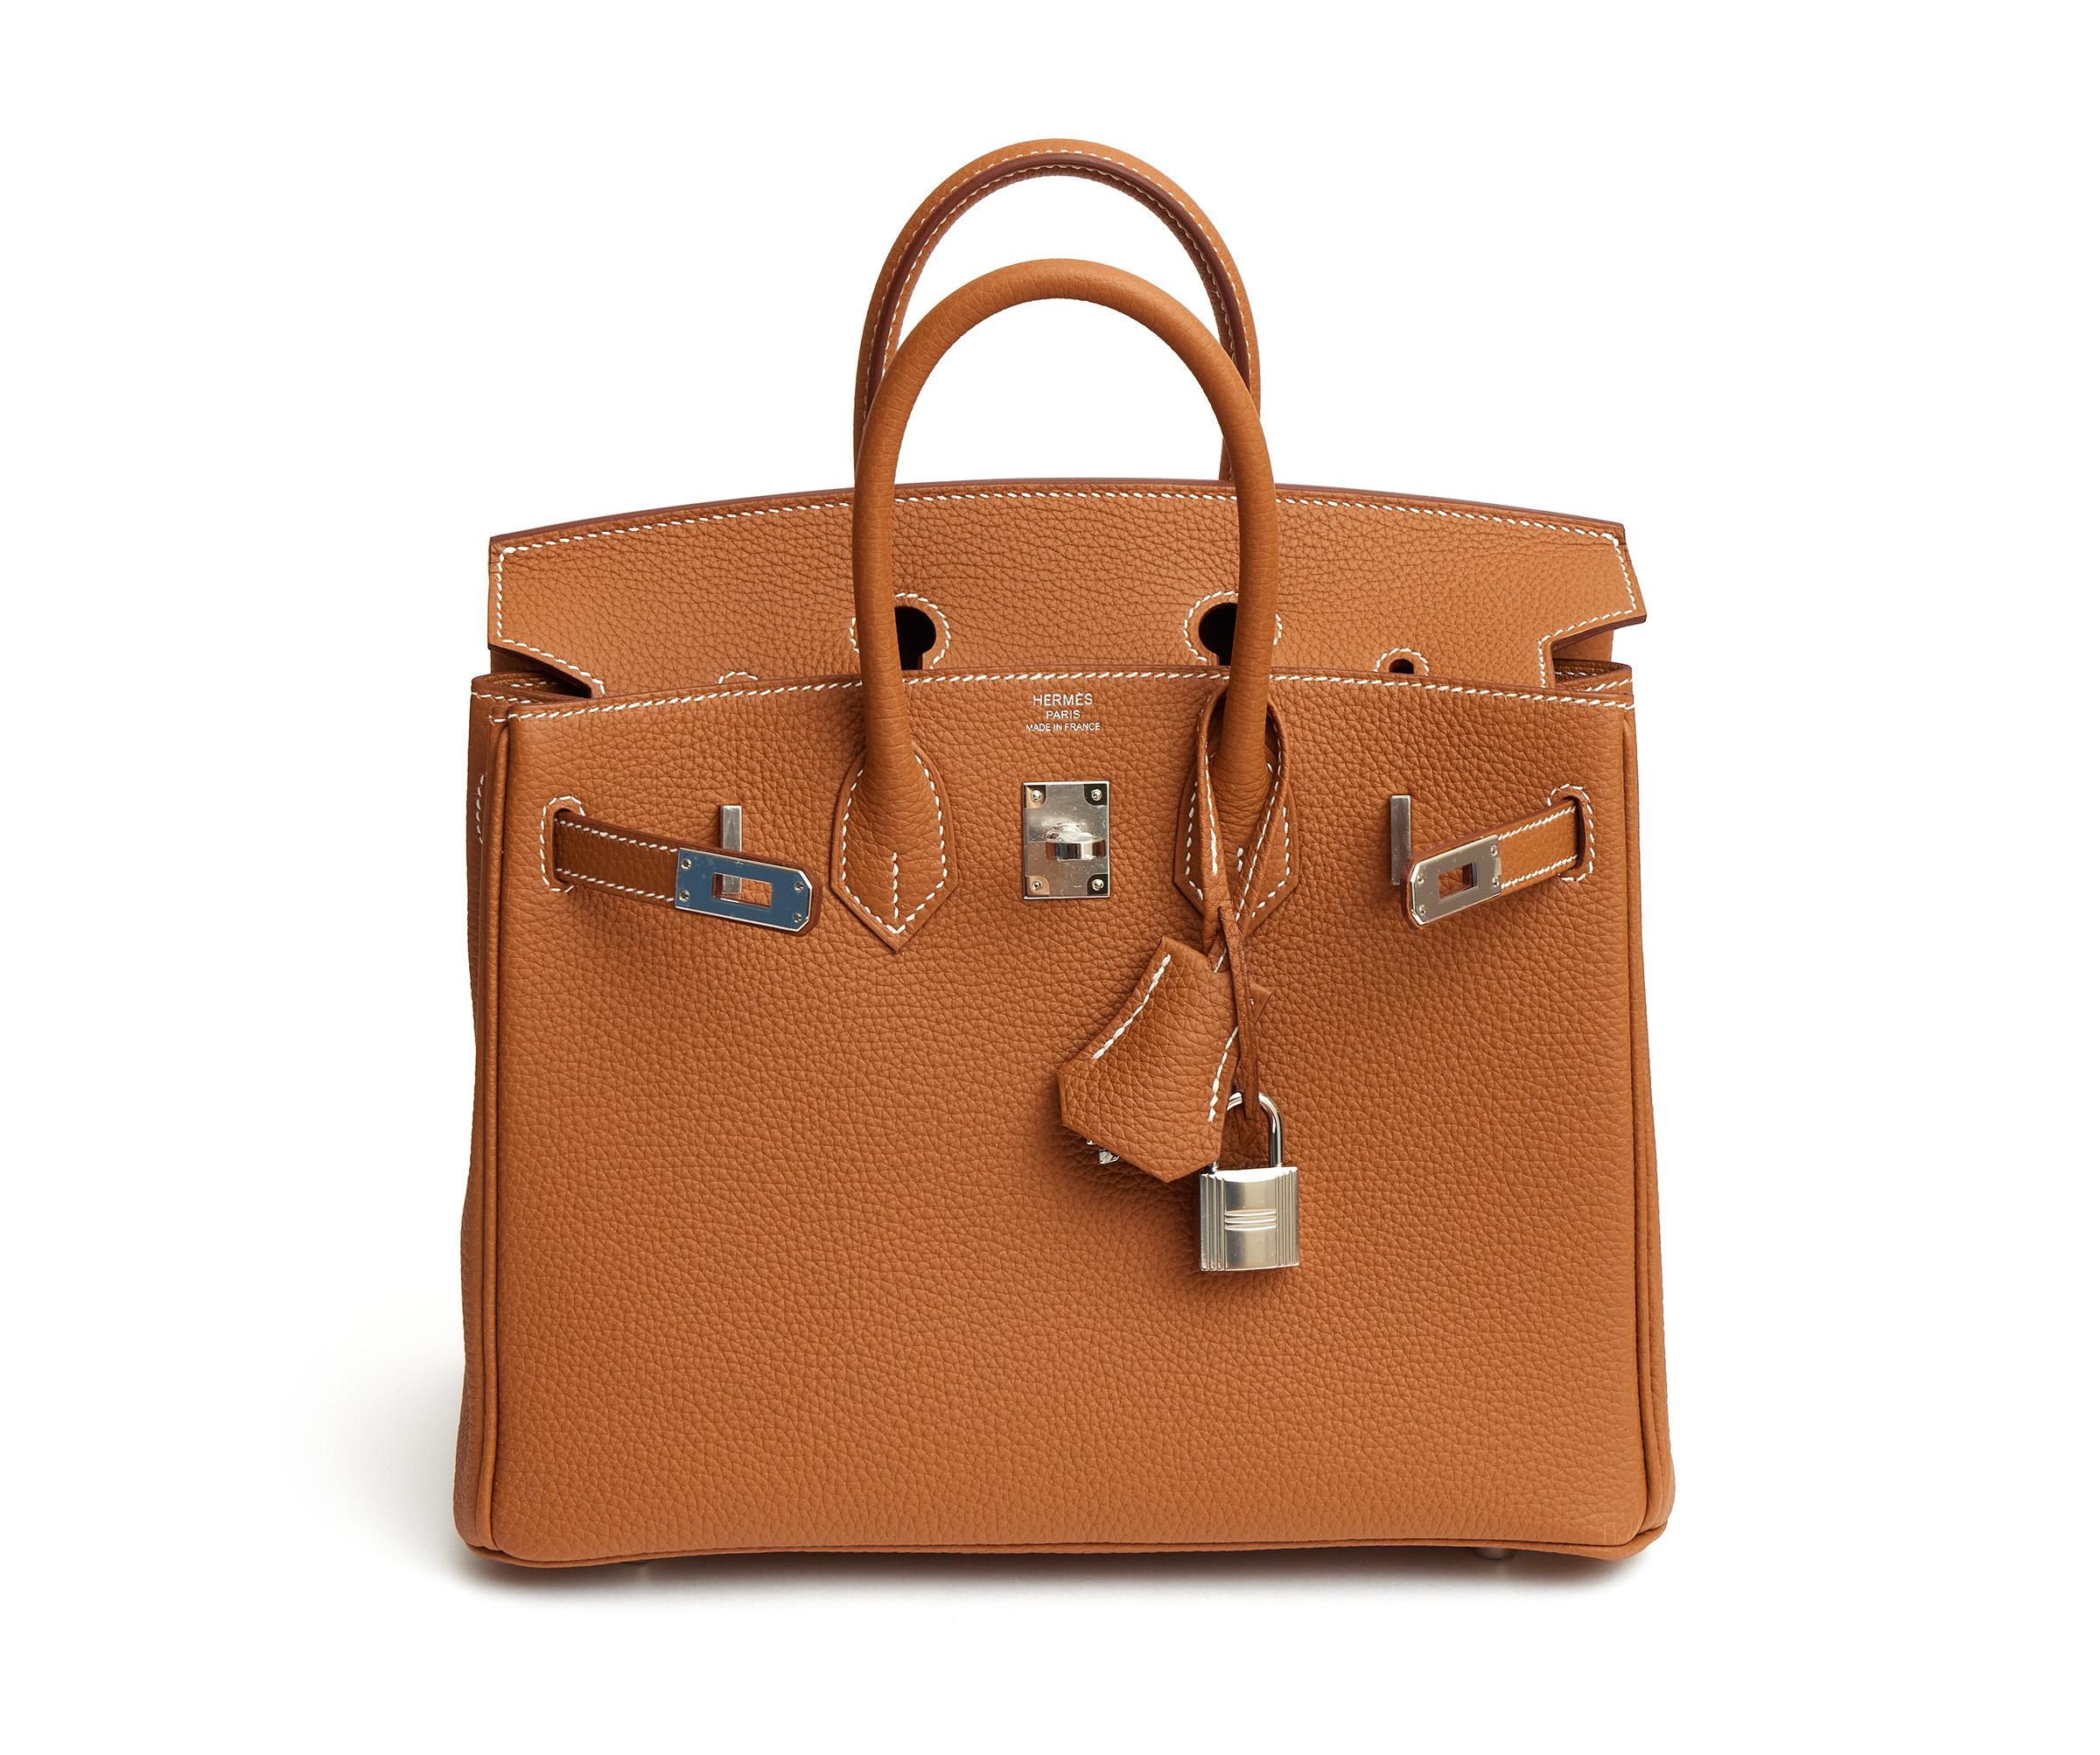 Hermès rare and collectible 25cm Birkin in gold togo leather with palladium hardware. Handle drop, 3